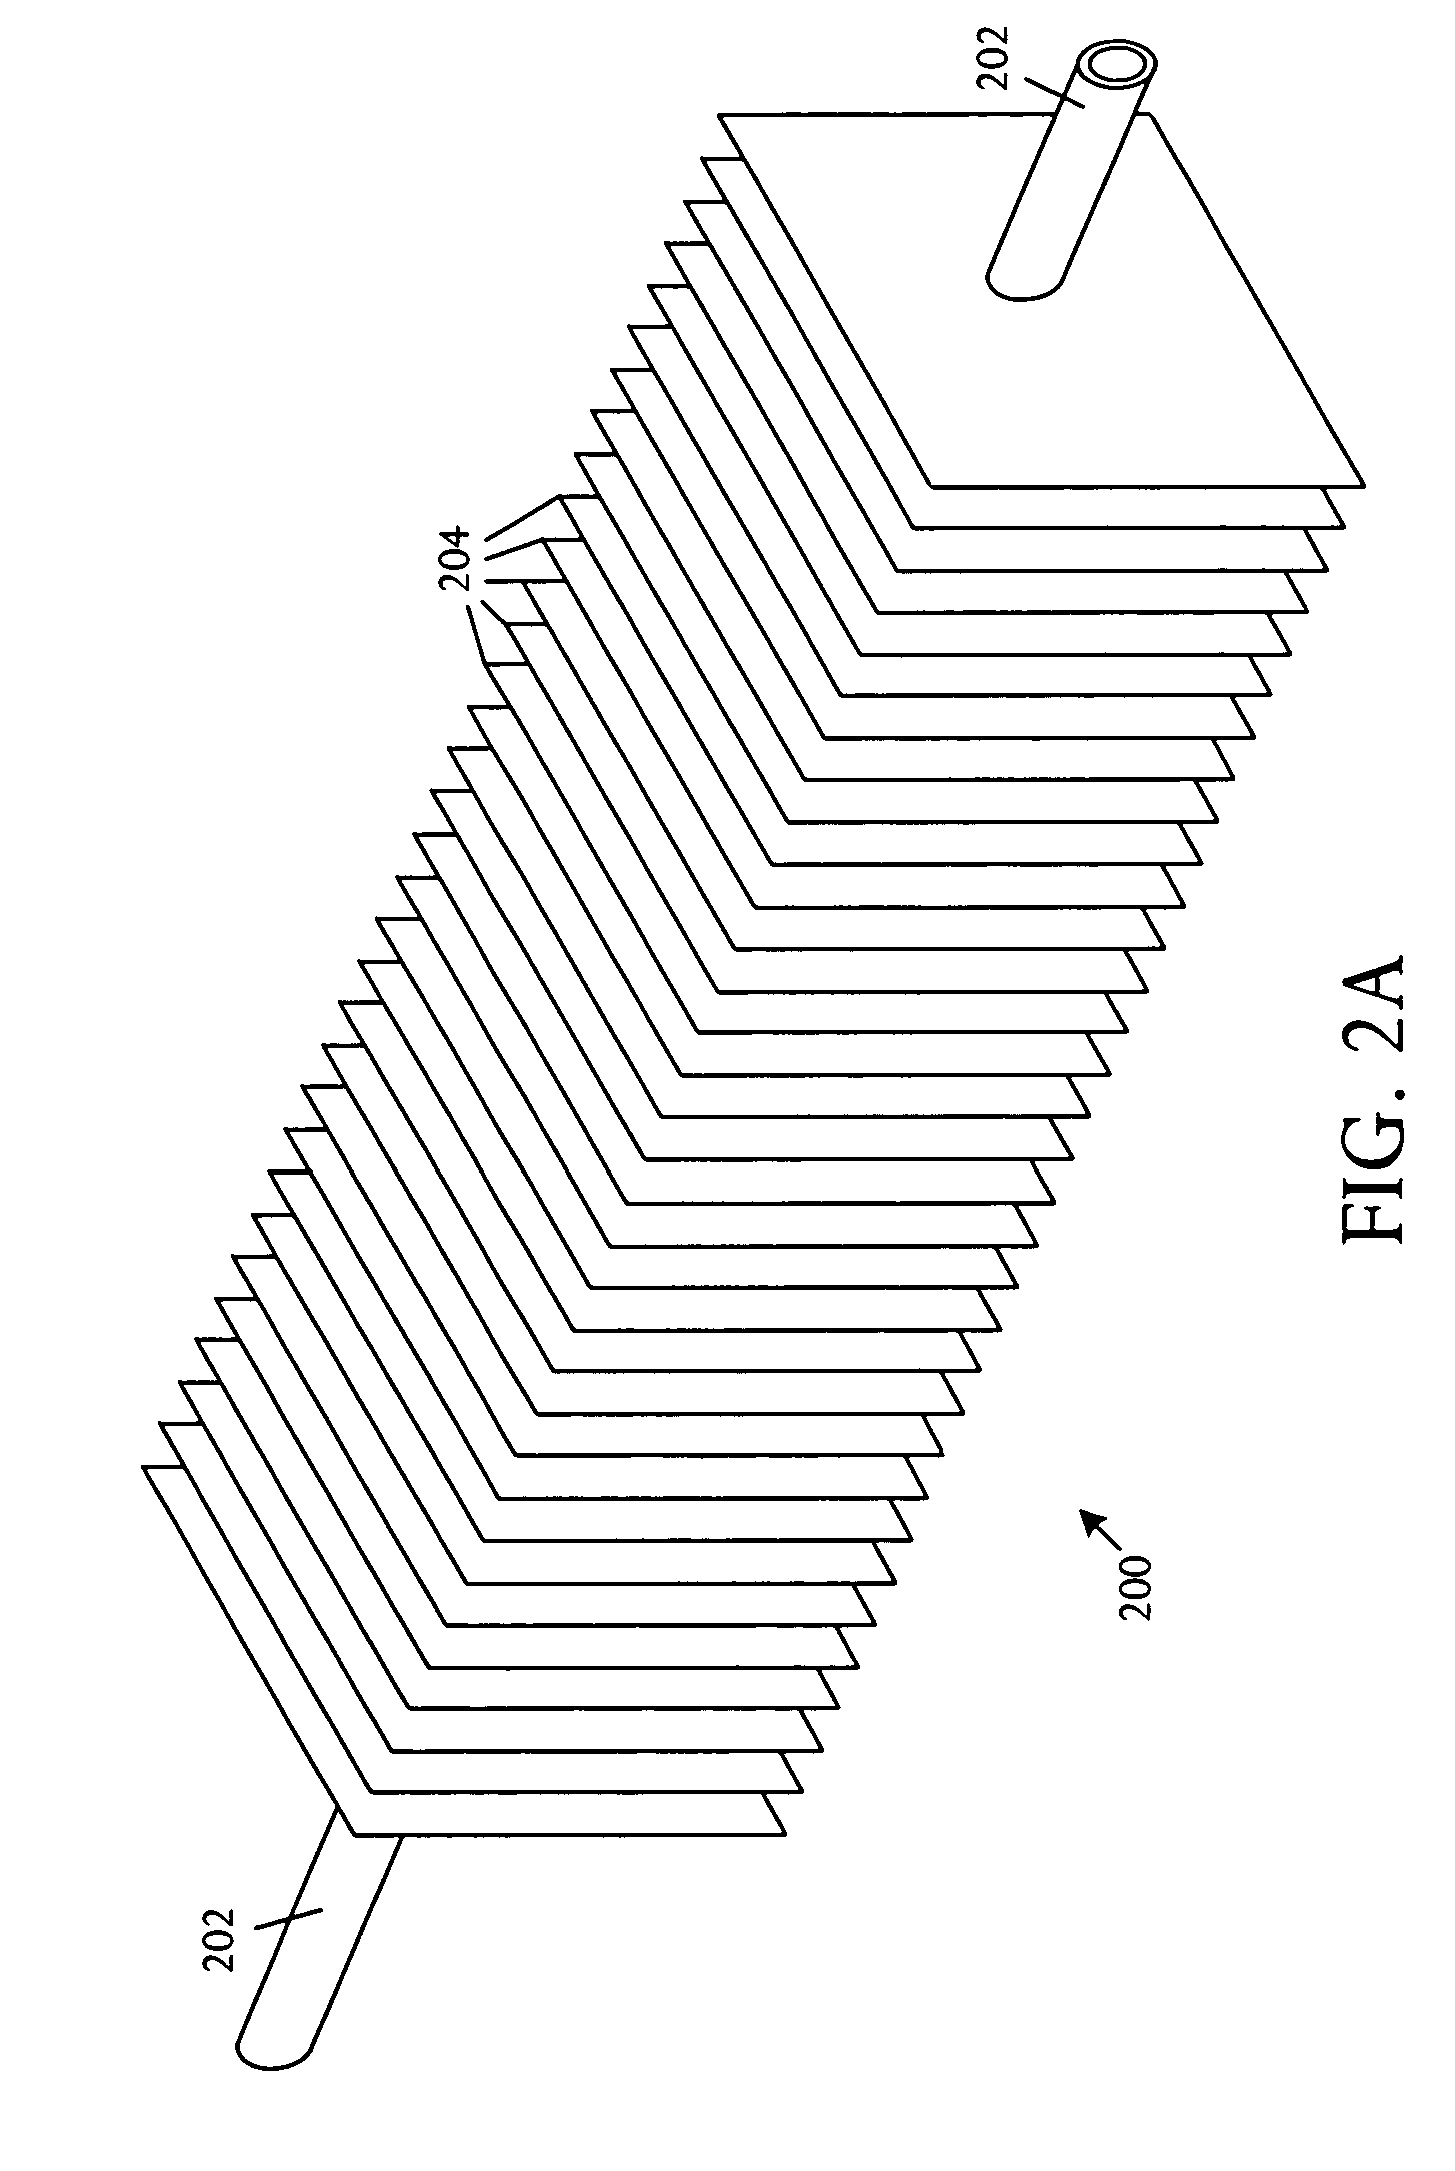 External liquid loop heat exchanger for an electronic system